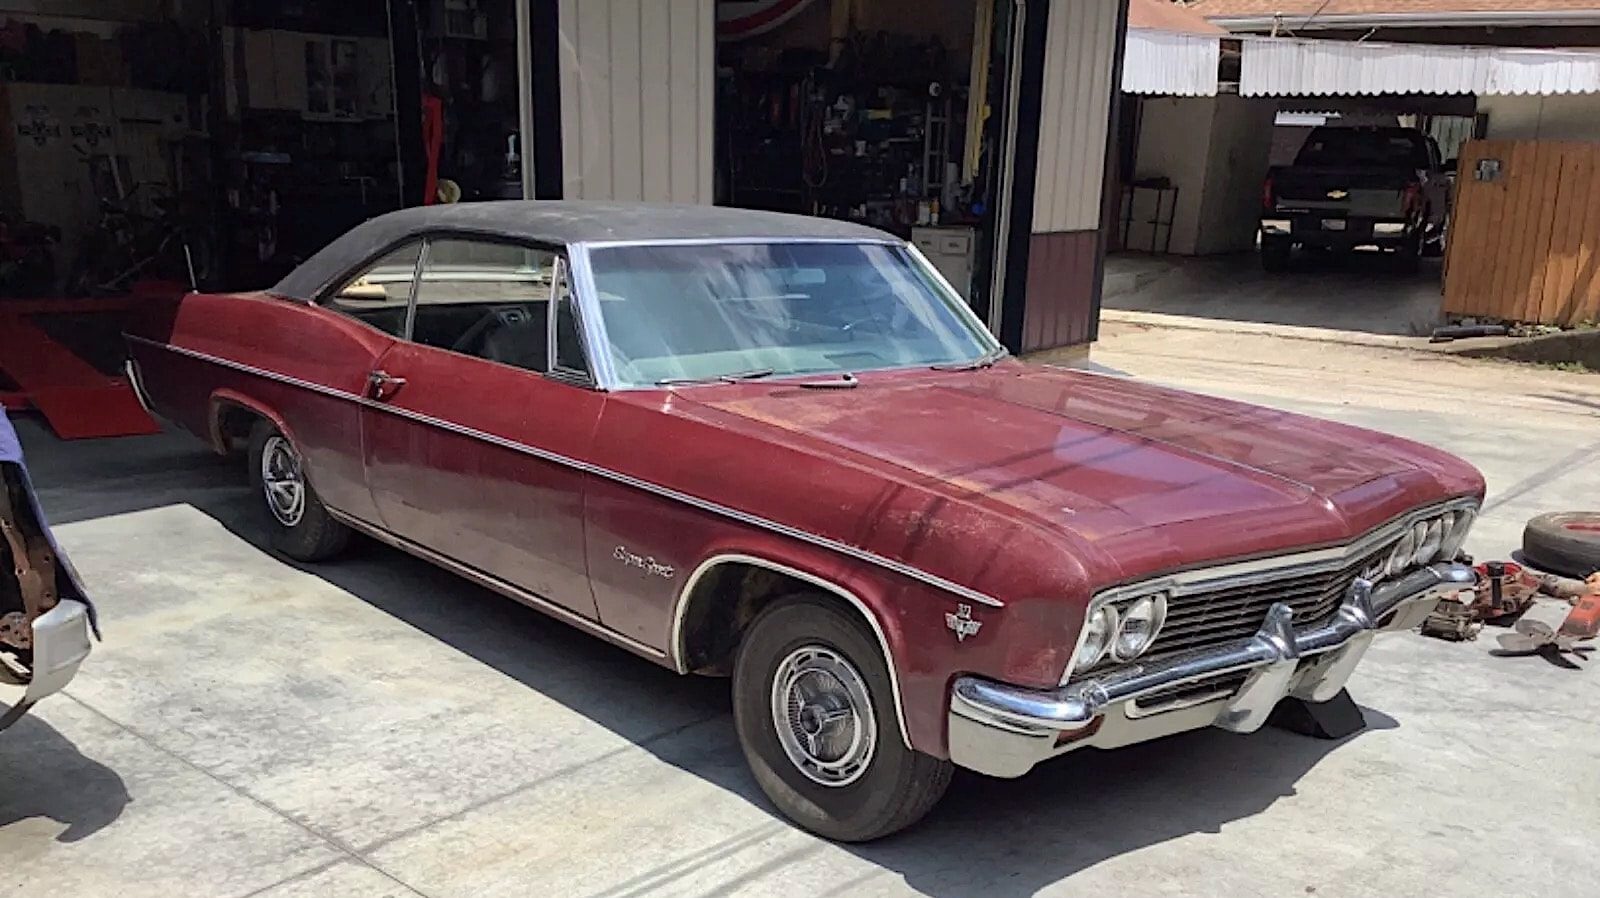 1966 Chevy Impala SS Found After Decades